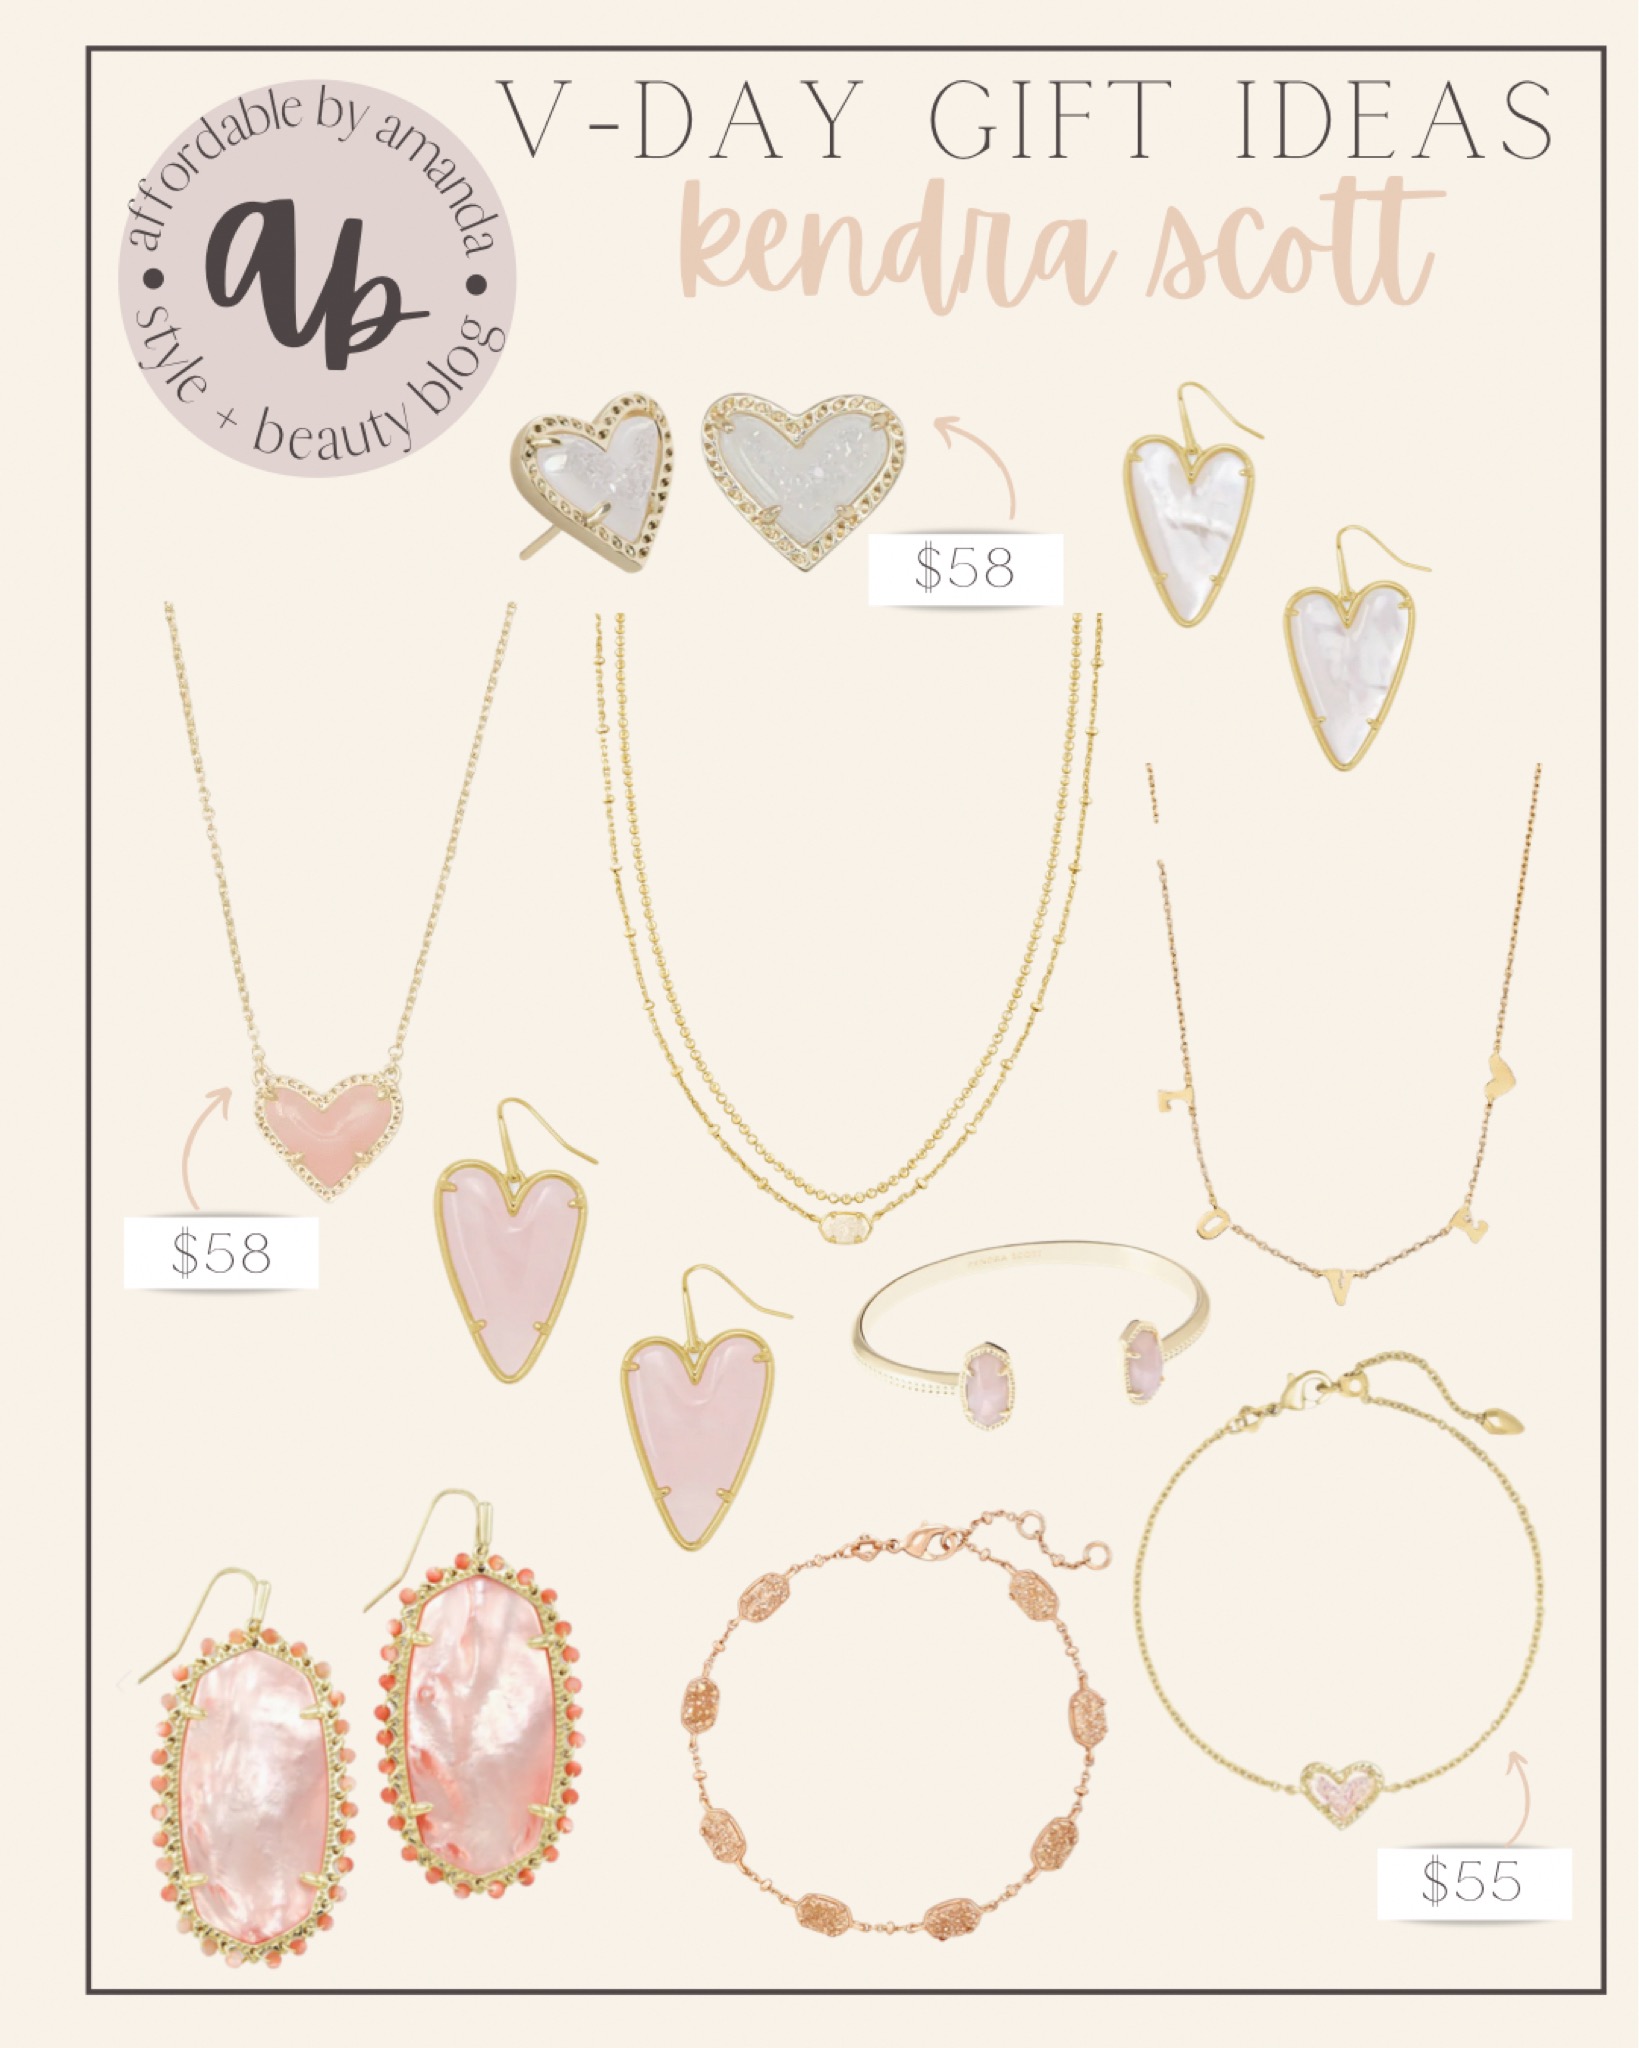 50 Valentine's Day Gifts for Her 2021 - Affordable by Amanda | Kendra Scott Valentine's Day Gifts for Her